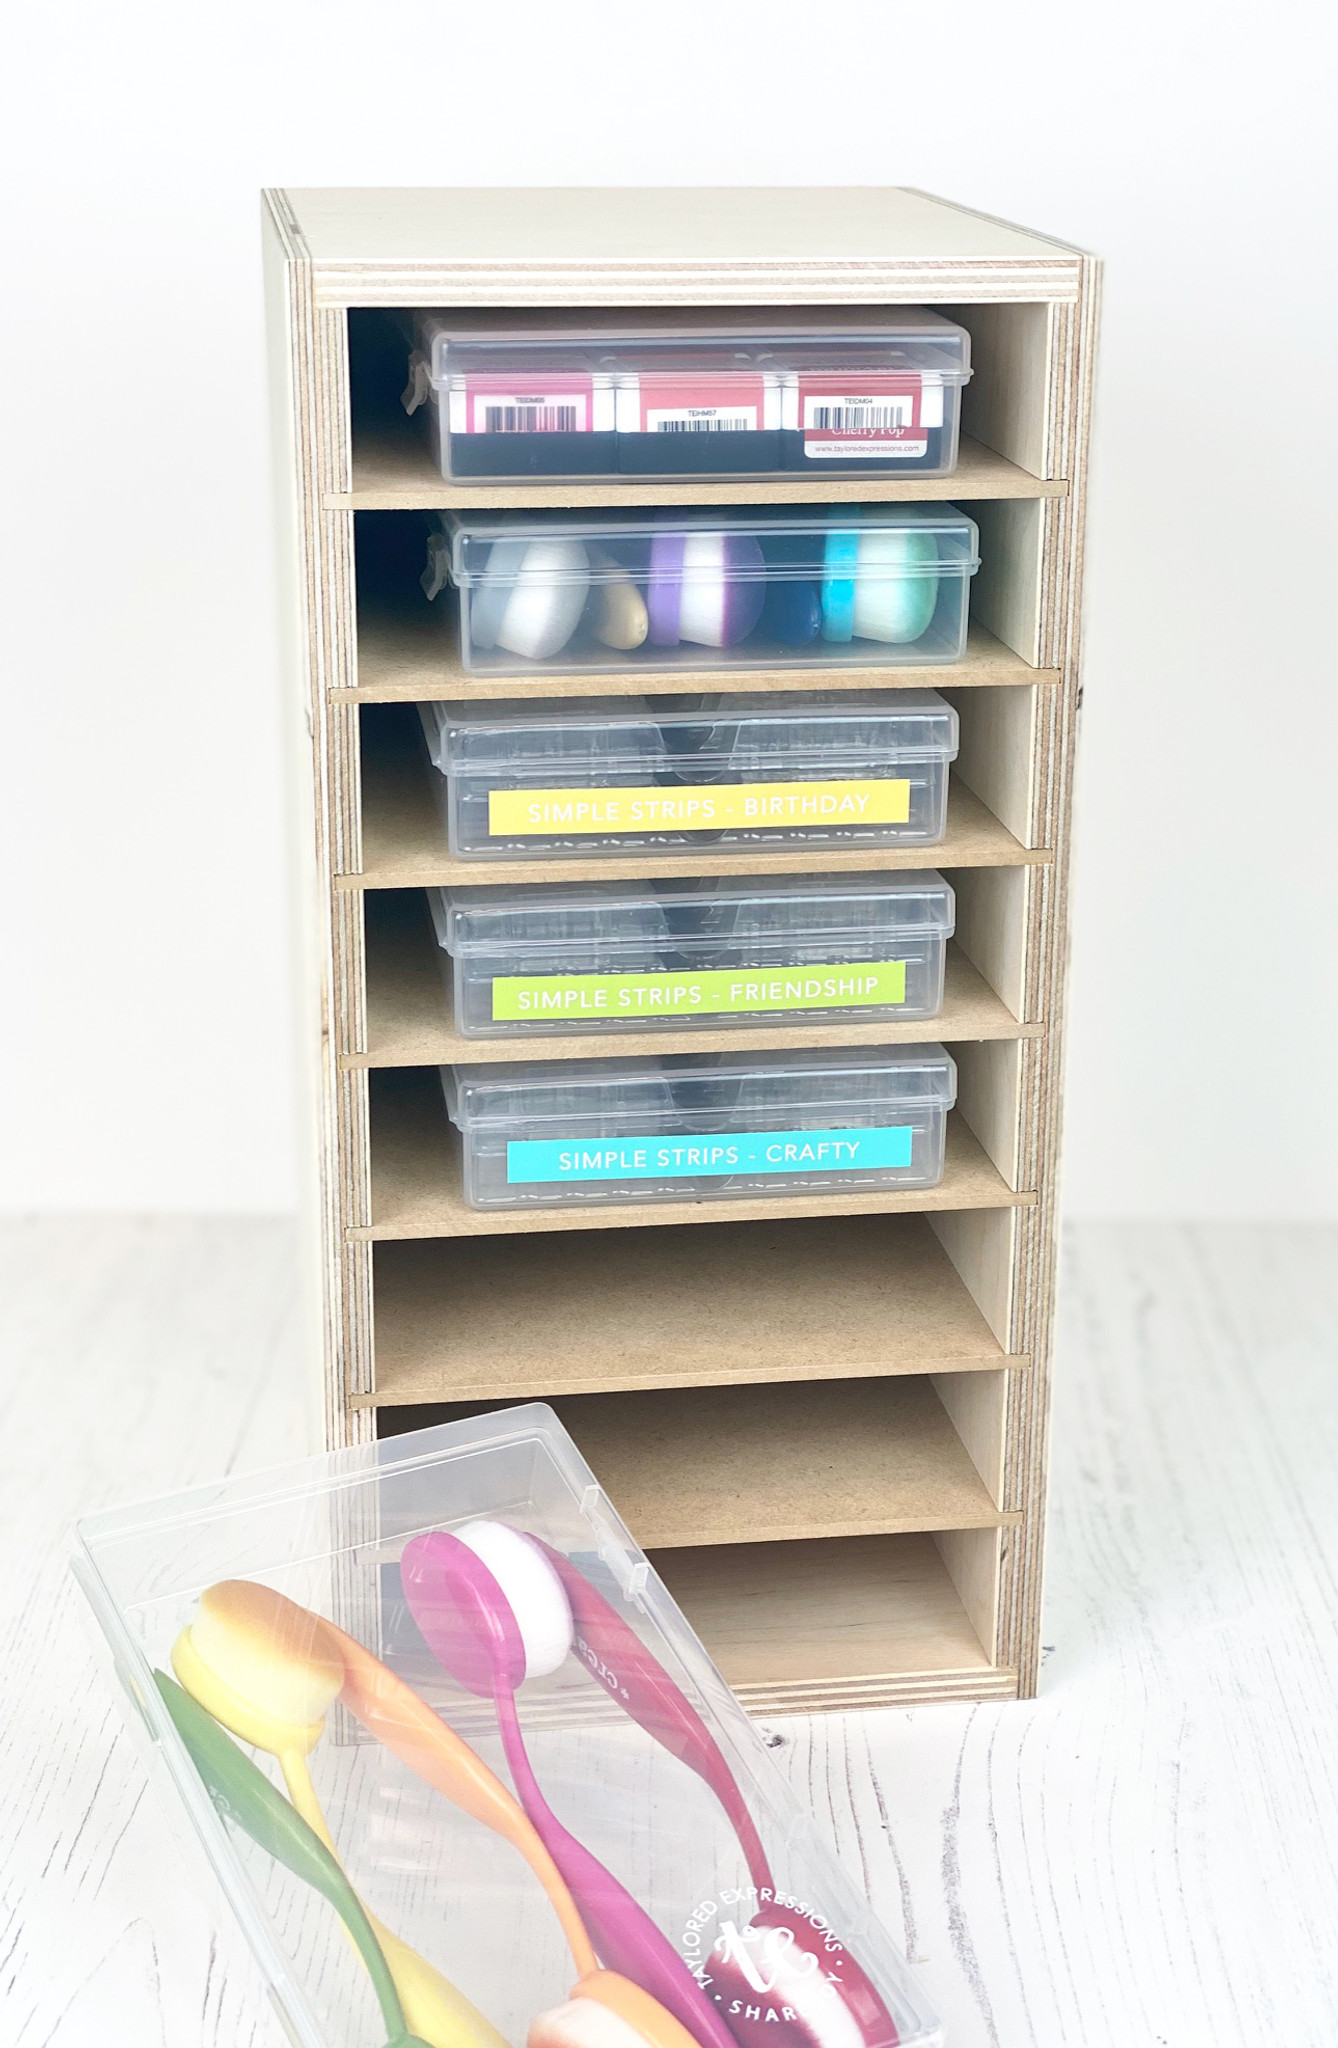 Taylored Expressions Simple Storage Shelving Unit